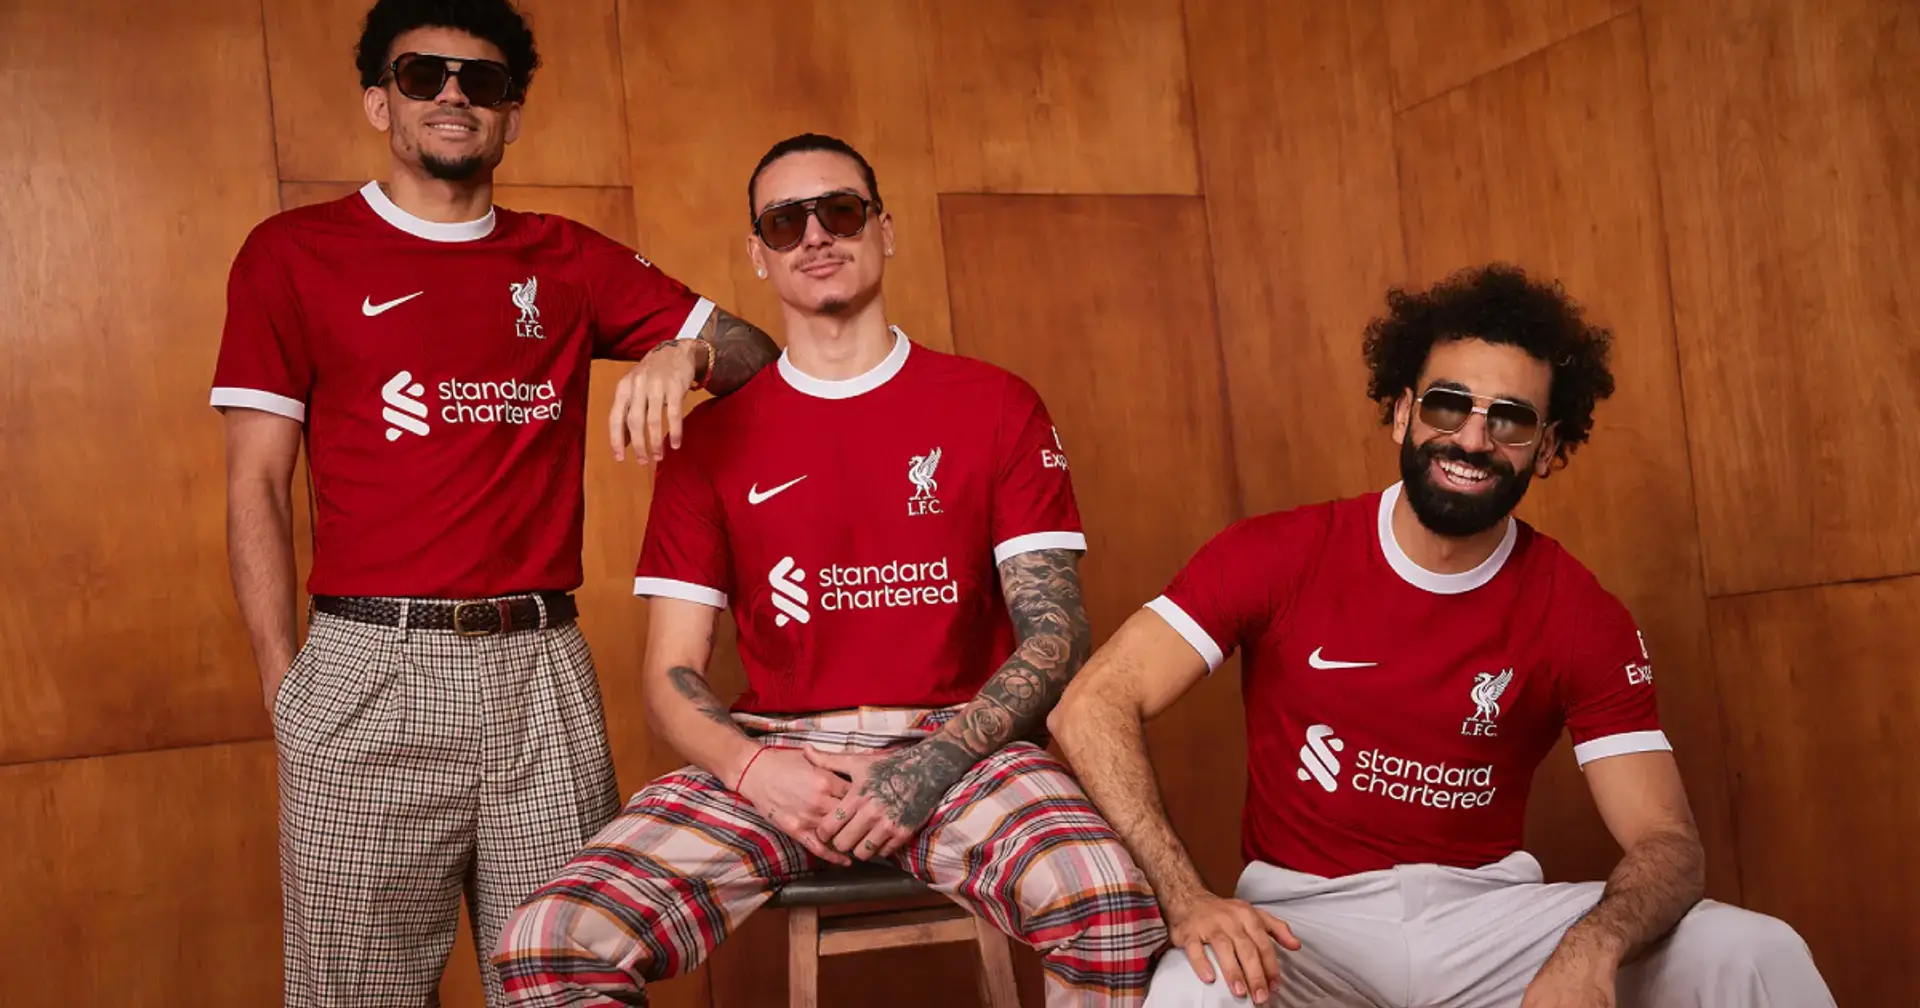 New kit to debut in Villa game and 3 more under-radar stories at Liverpool